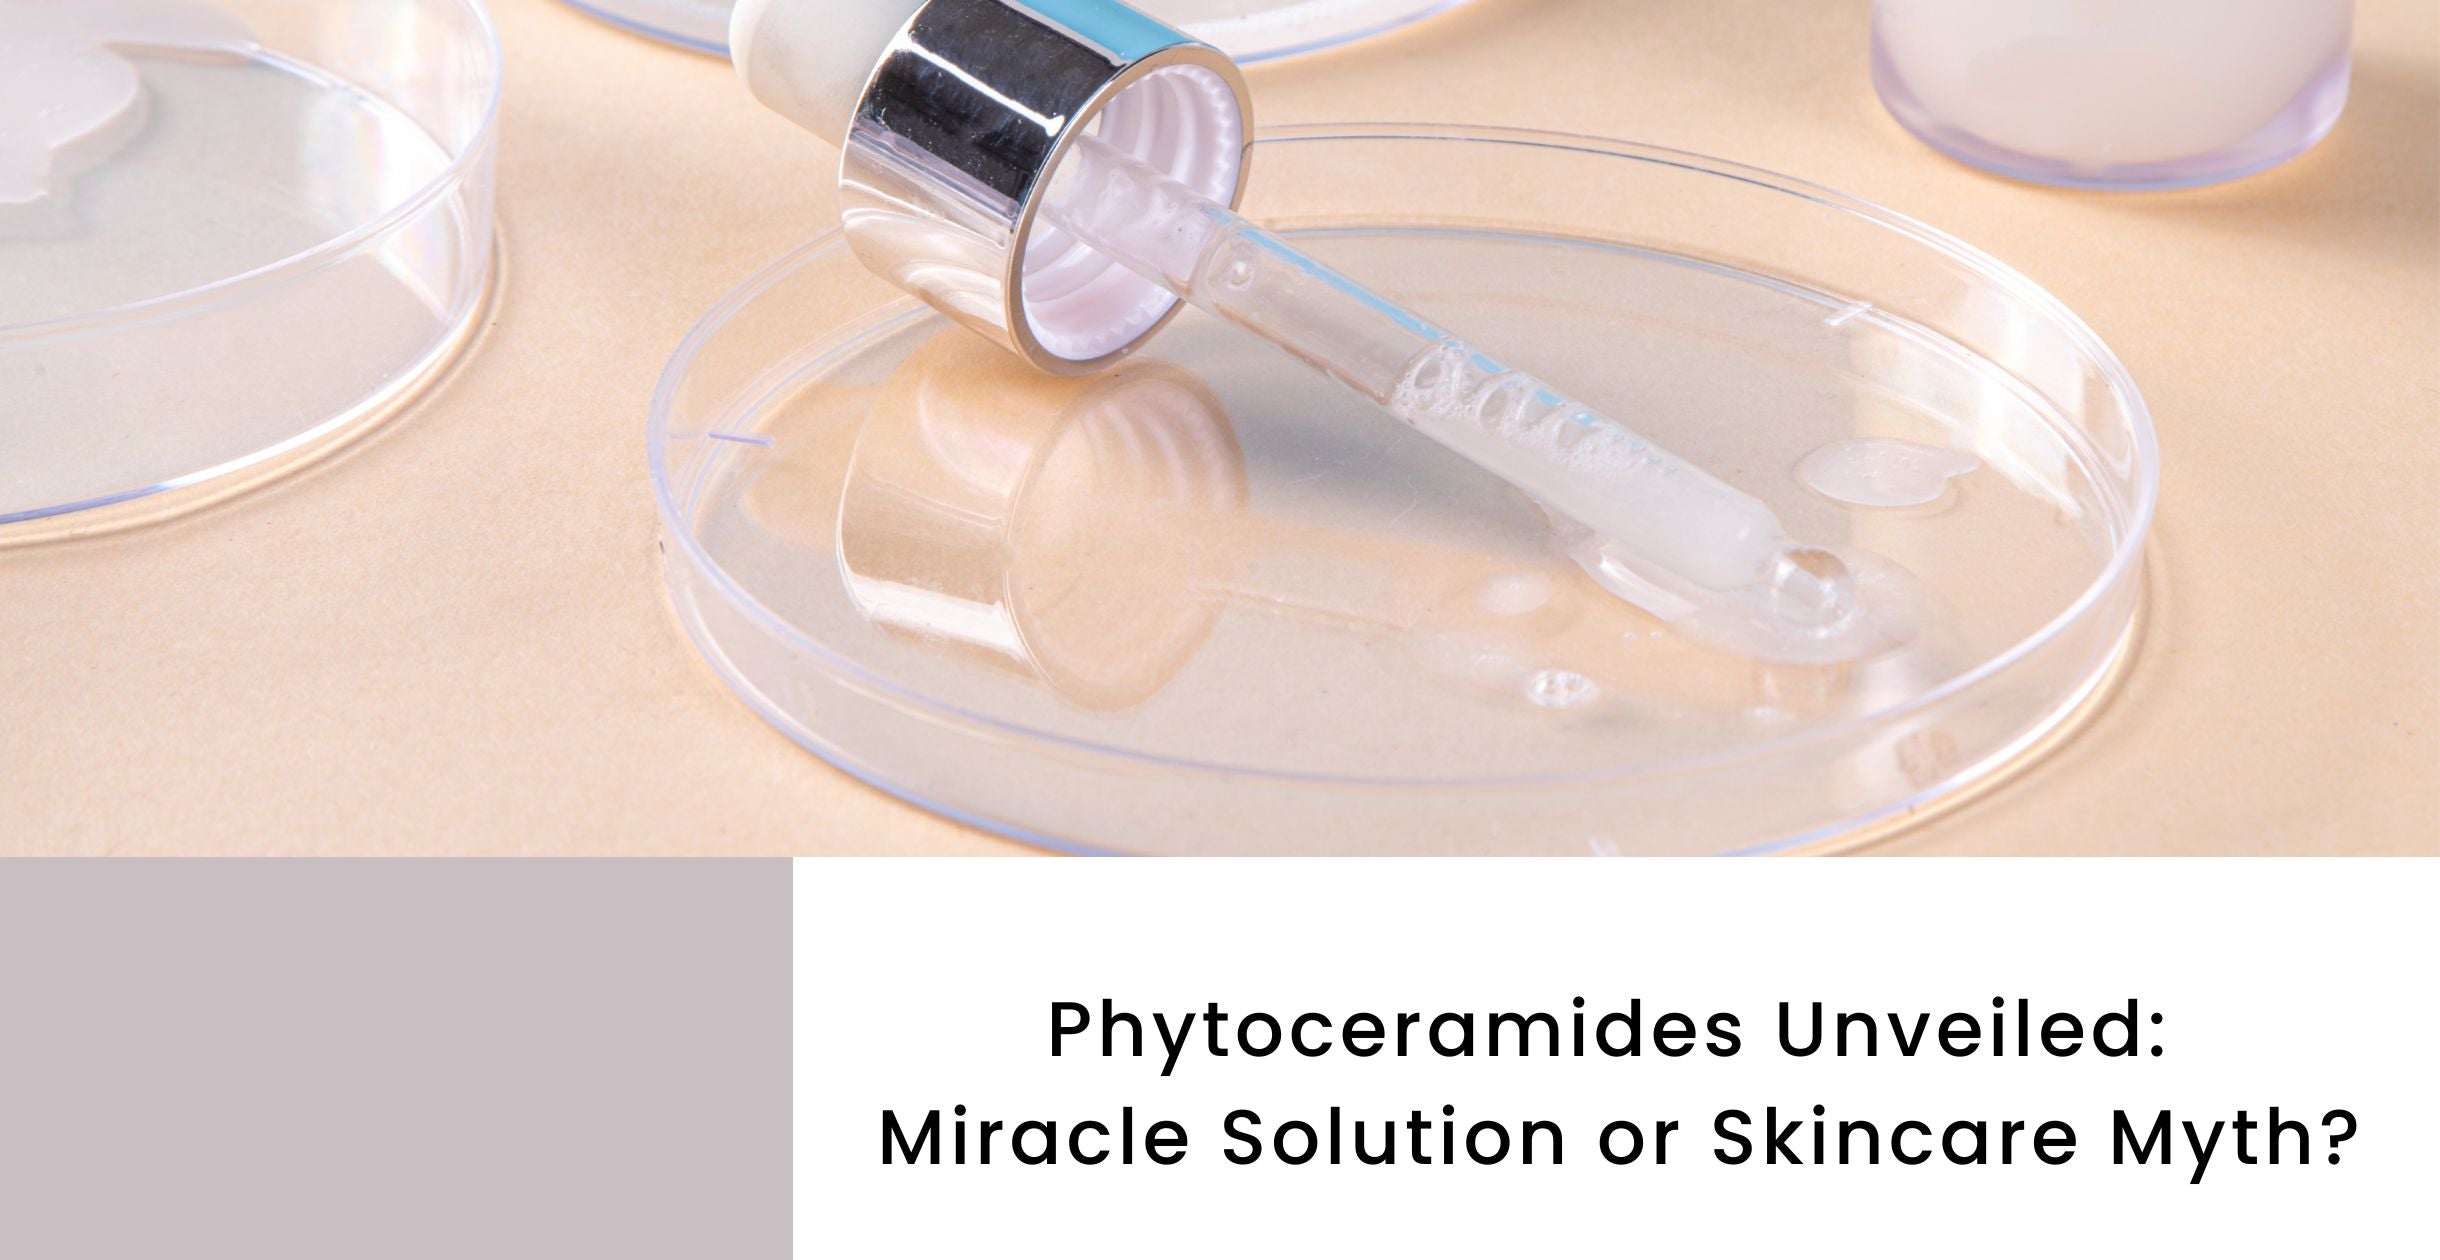 Phytoceramides Unveiled: Miracle Solution or Skincare Myth?